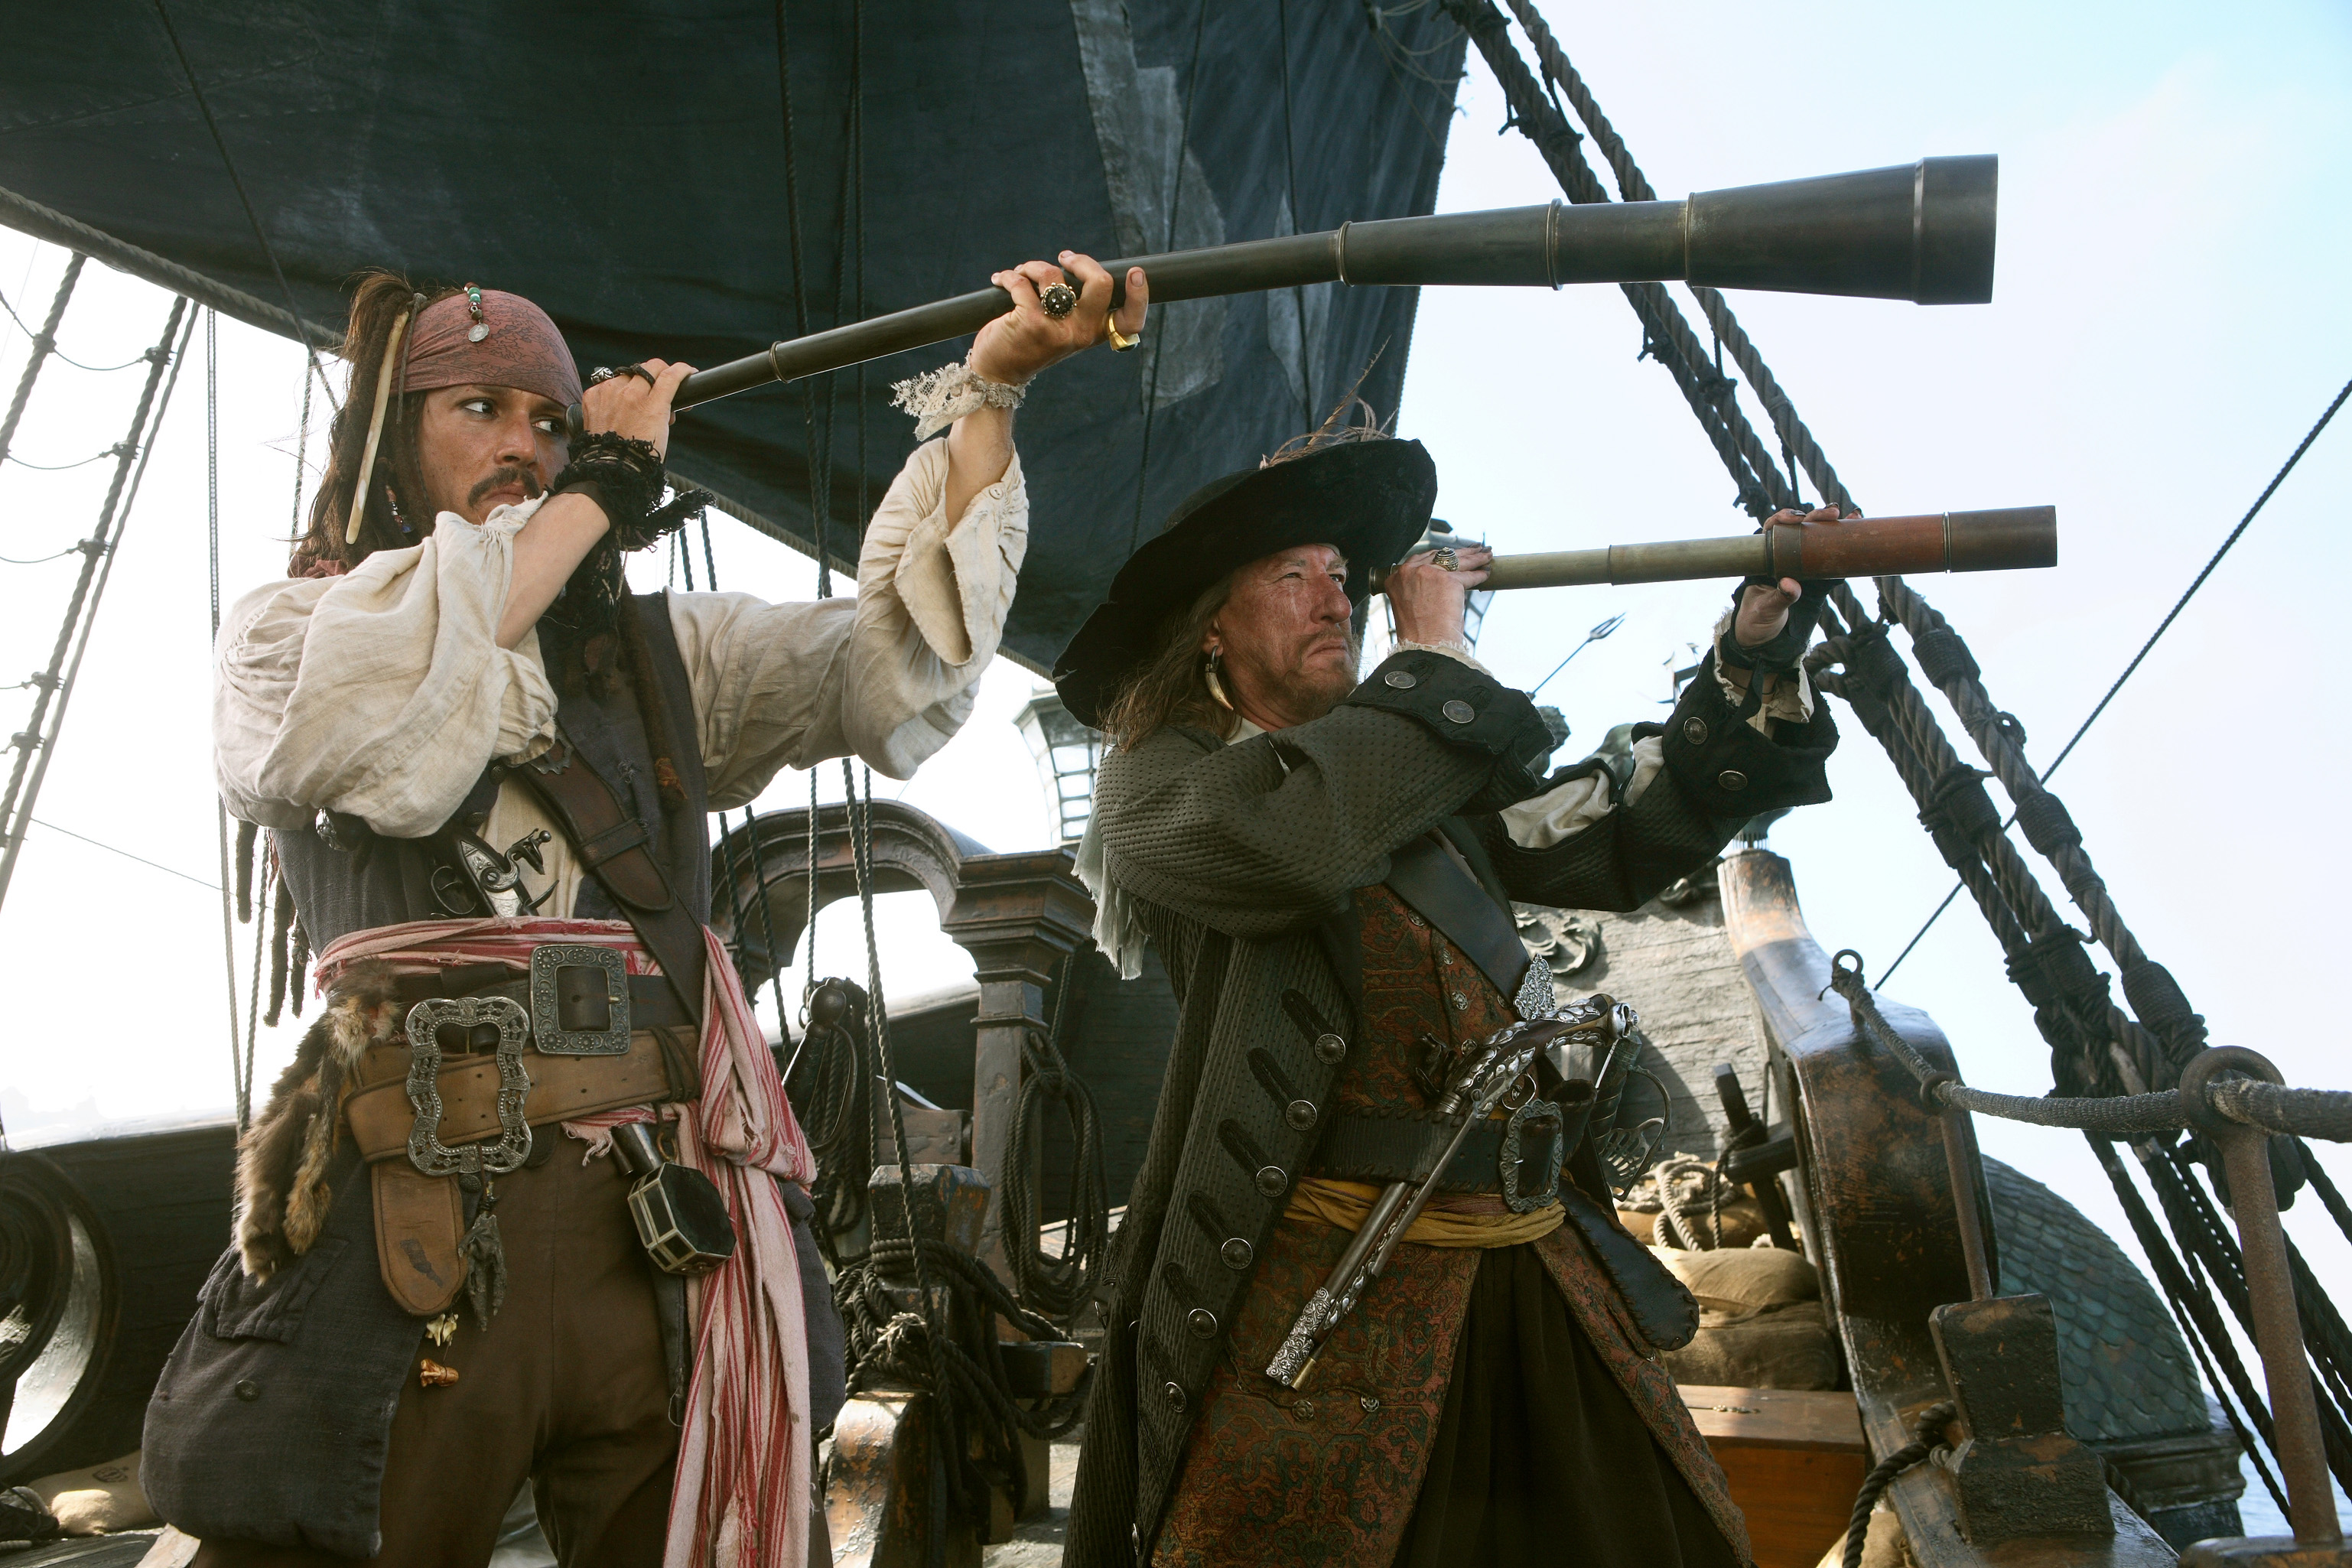 Free HD jack sparrow, movie, pirates of the caribbean: at world's end, geoffrey rush, hector barbossa, johnny depp, pirates of the caribbean